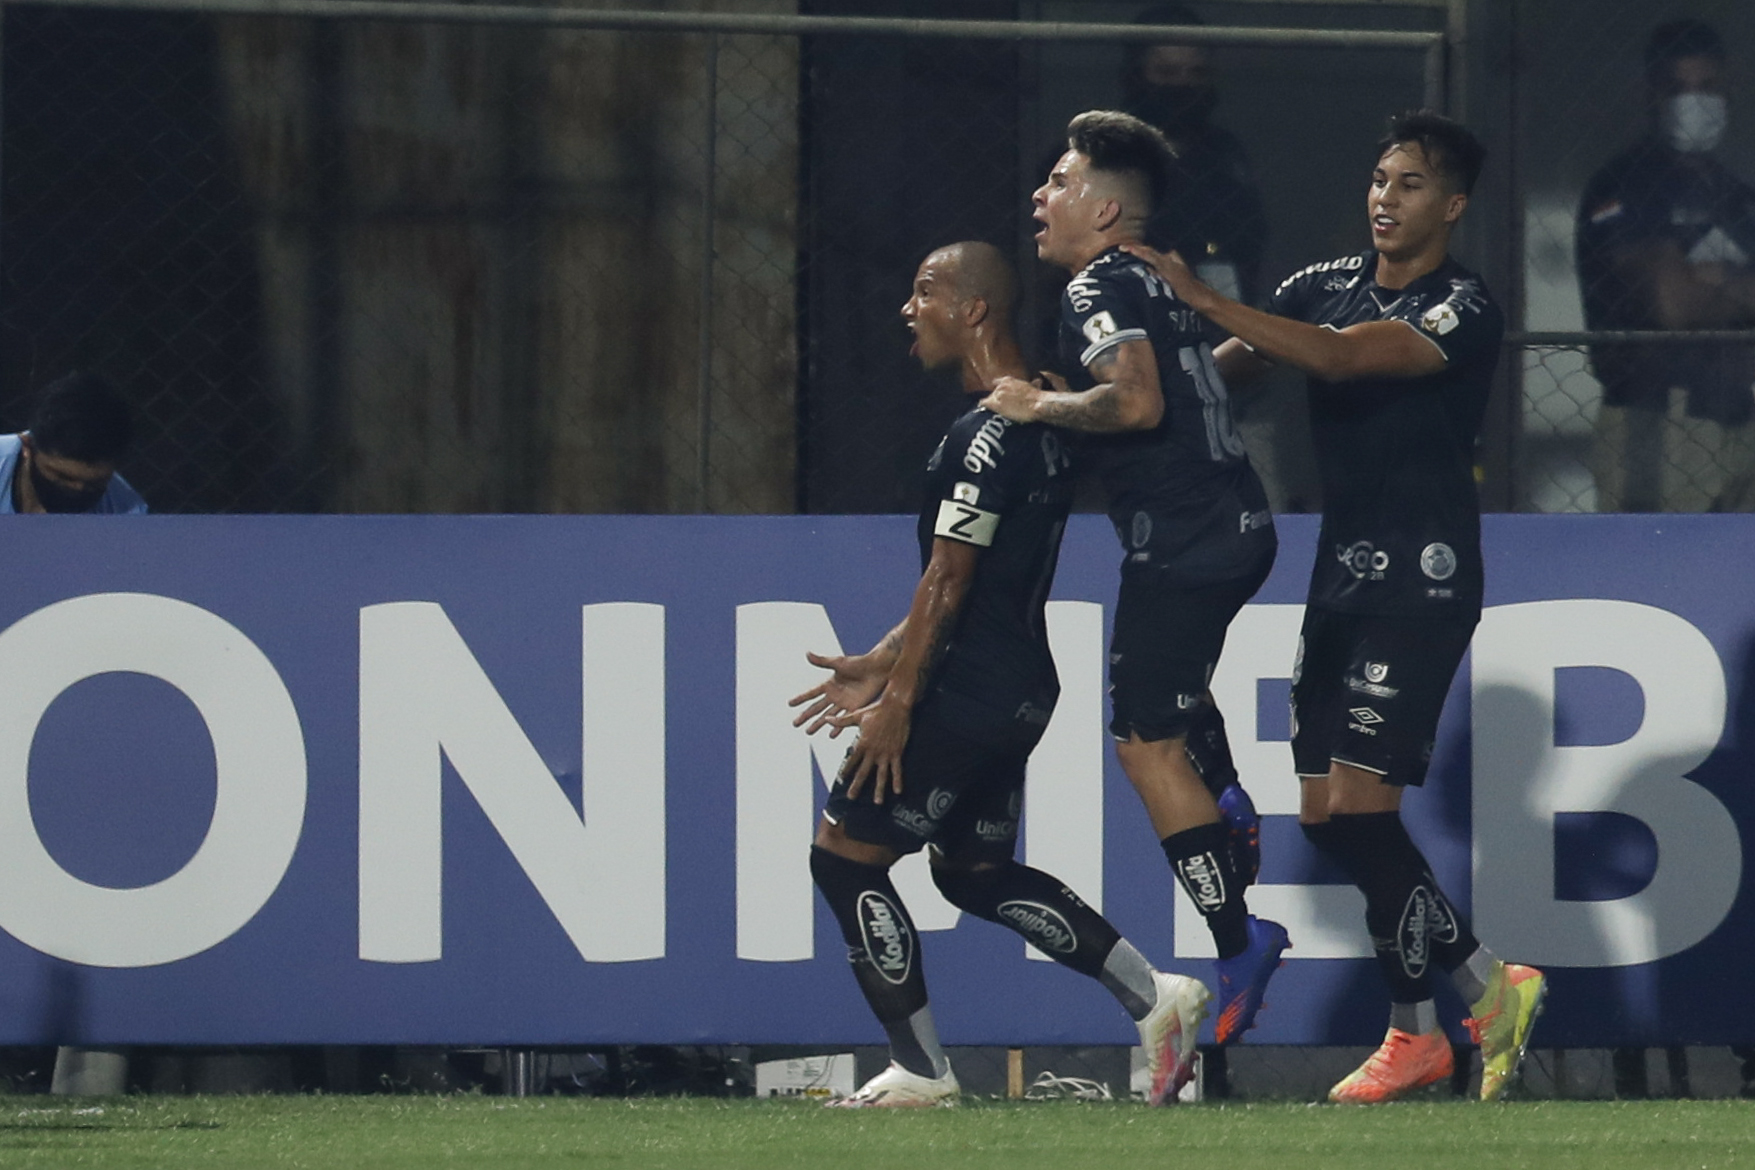 Brazil's Santos midfielder, Uruguayan Carlos Sanchez (L) celebrates after scoring against Paraguay's Olimpia during their closed-door Copa Libertadores group phase football match at the Manuel Ferreira Stadium in Asuncion, on October 1, 2020, amid the COVID-19 novel coronavirus pandemic. (Photo by Jorge SAENZ / POOL / AFP) (Photo by JORGE SAENZ/POOL/AFP via Getty Images)